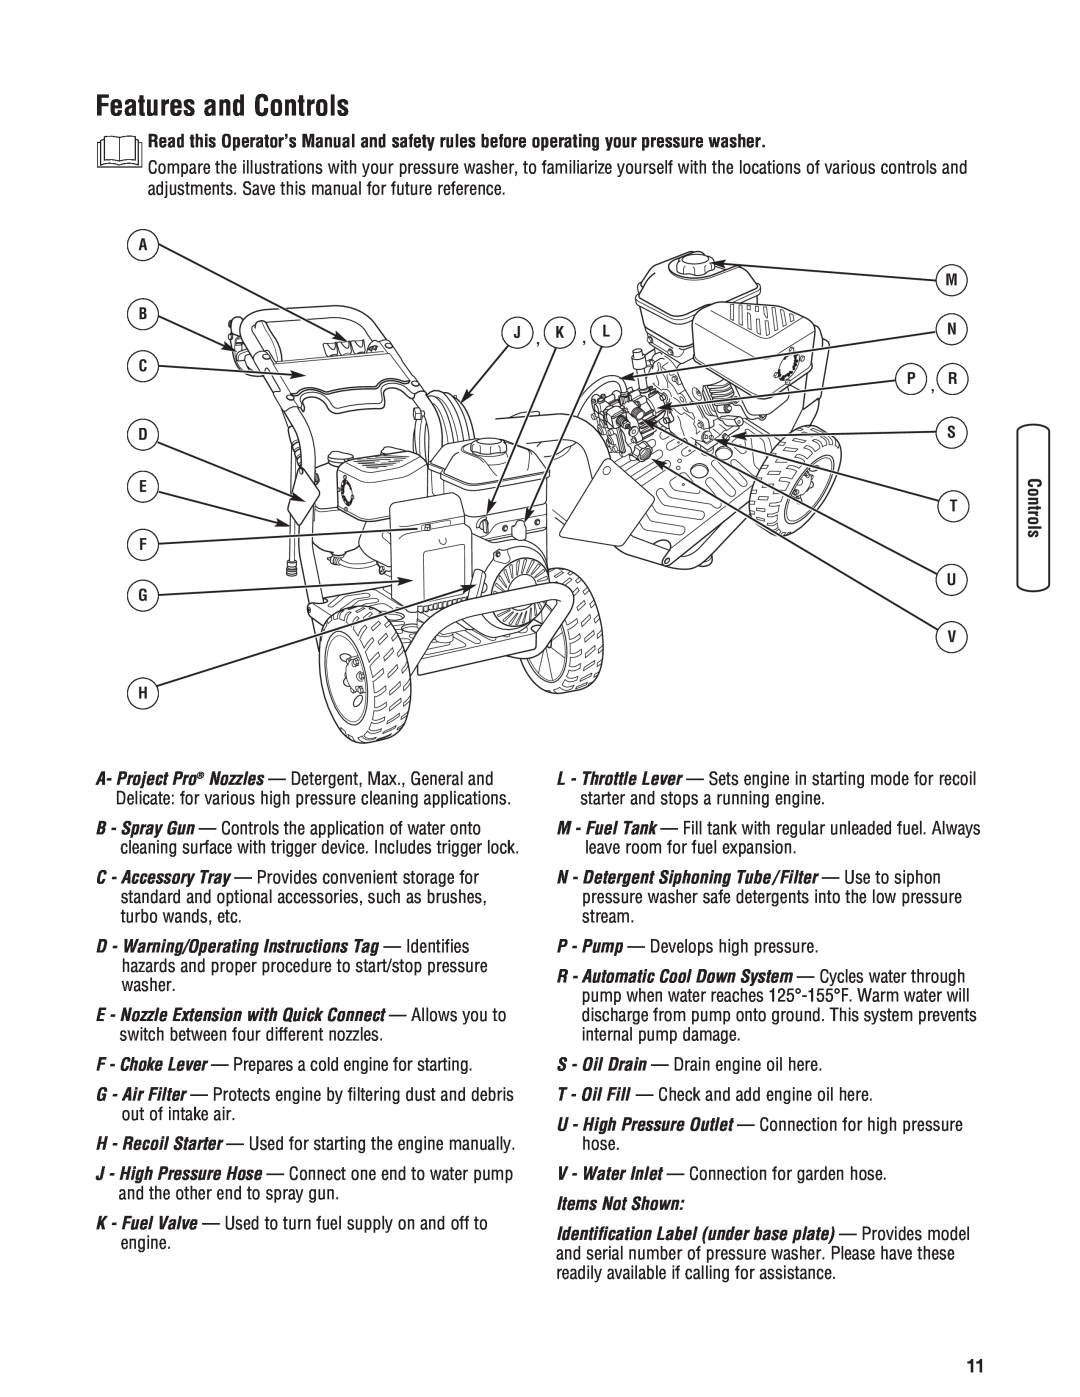 Briggs & Stratton 2900 PSI manual Features and Controls 